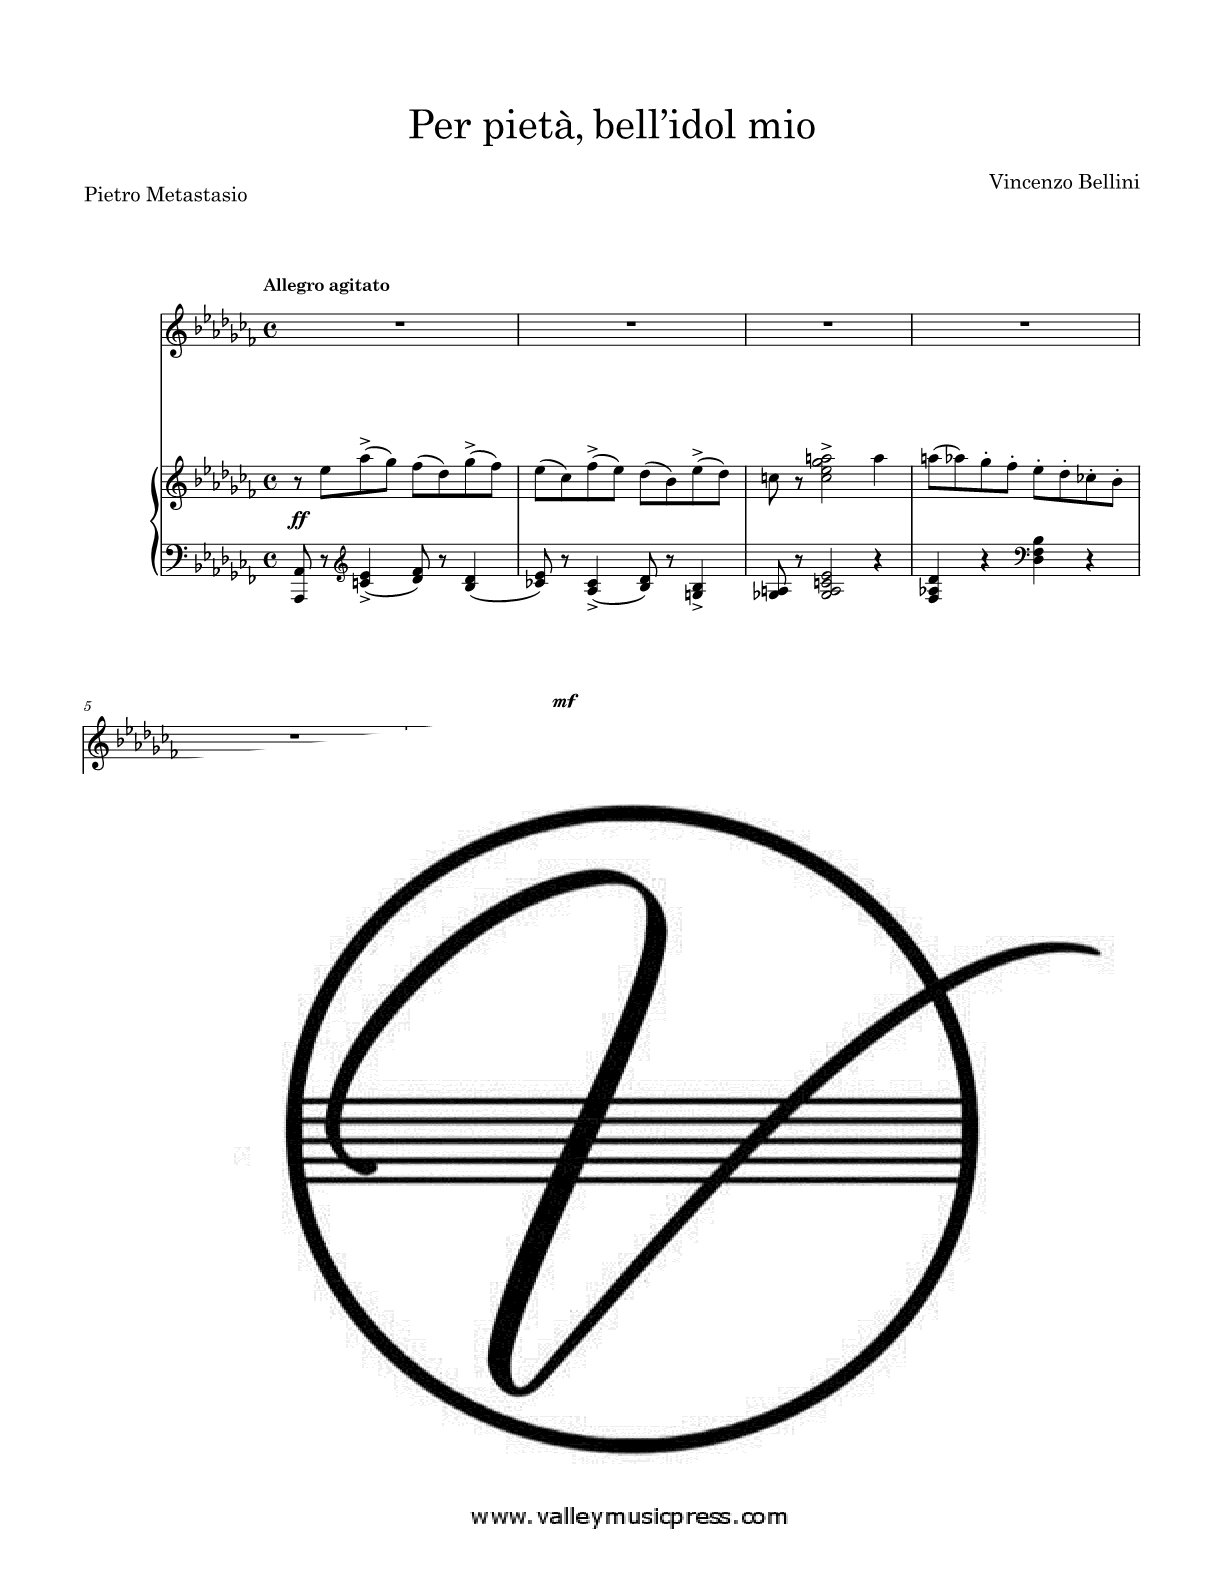 condenser Stupid Anzai Bellini - Per pieta, bell'idol mio (Voice) Vincenzo Bellini Per pieta, bell'idol  mio for Voice and Piano Accompaniment Downloadable PDF Sheet Music  Transposed Any Key Any Clef [VMP528] - $5.49 : Valley